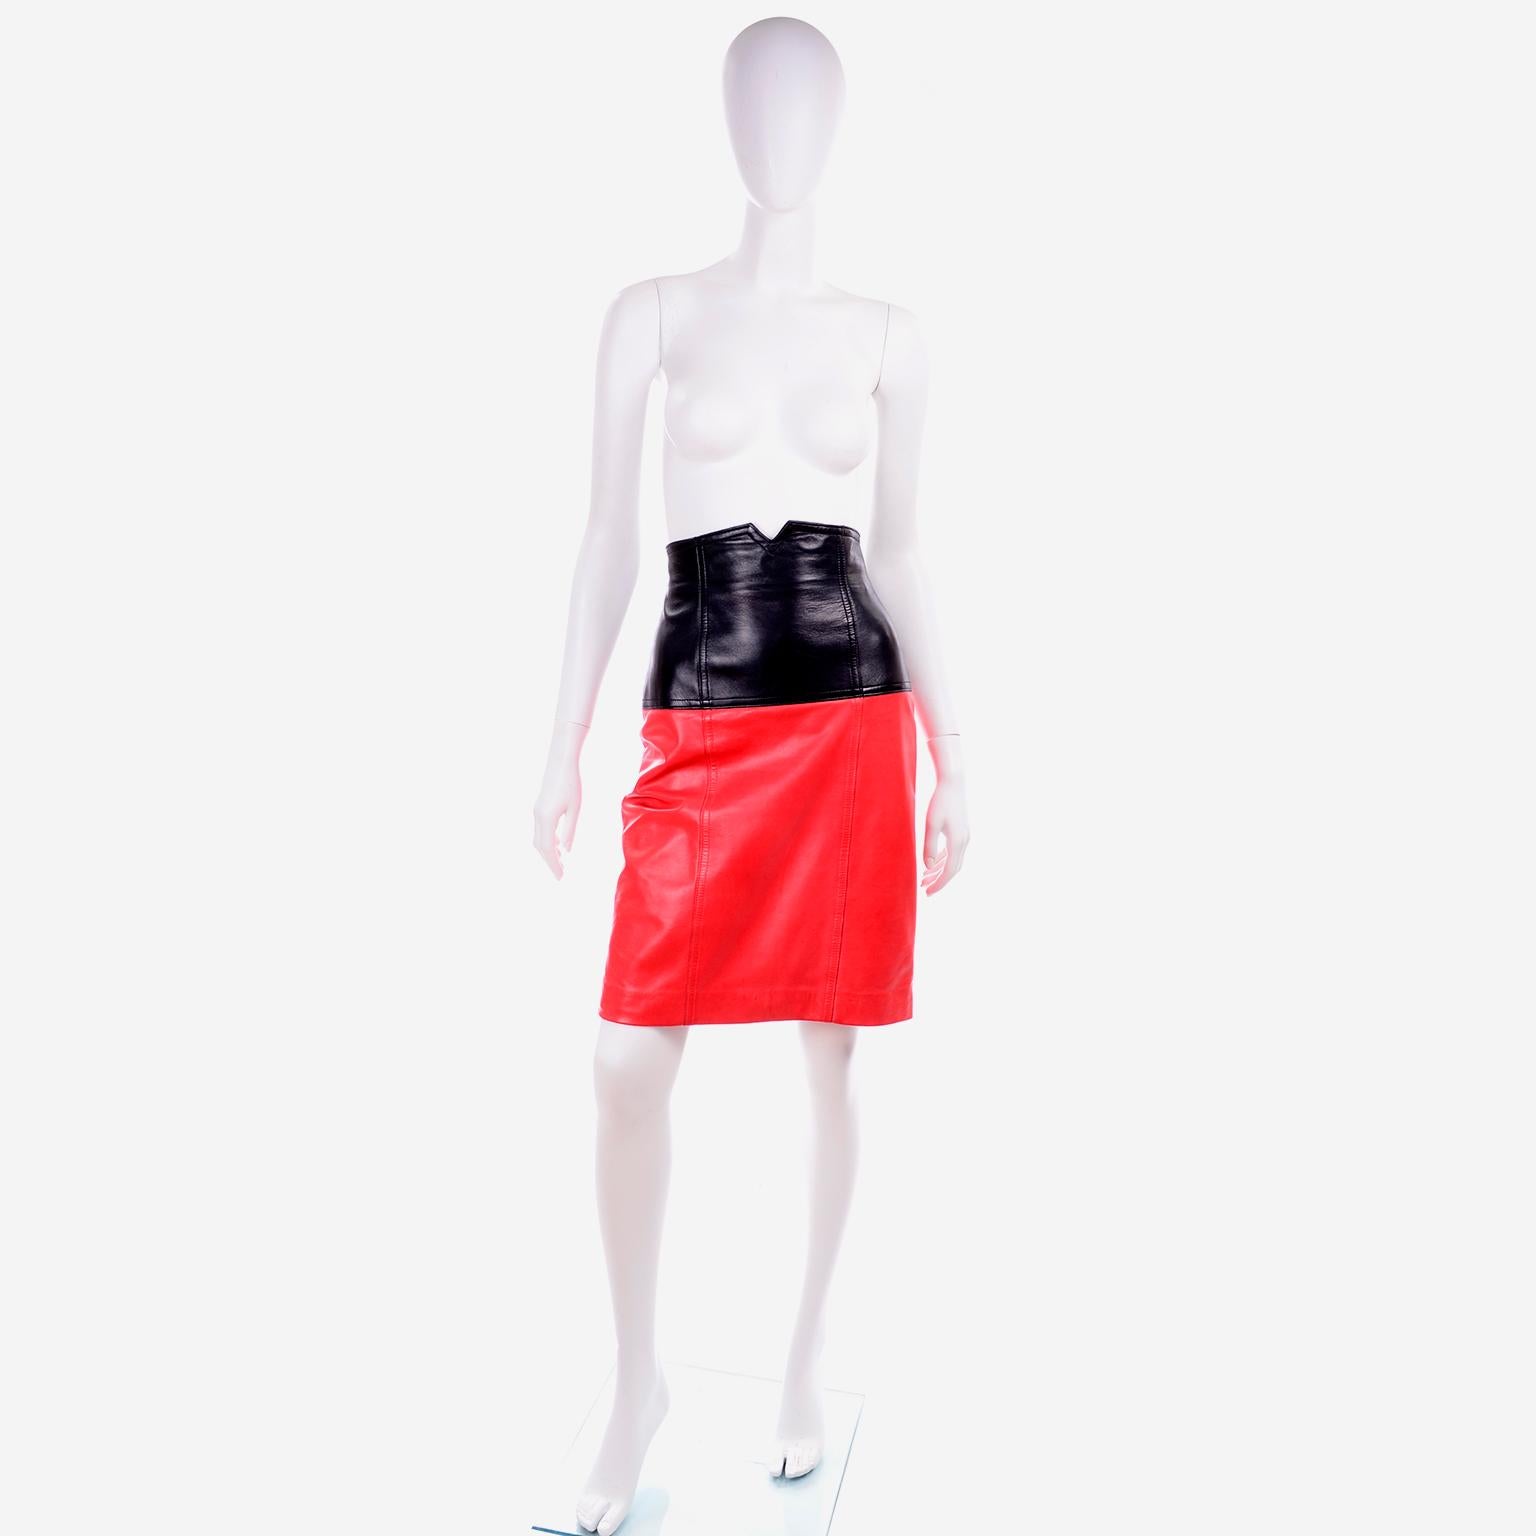 This is an amazing bright red and black color block leather pencil skirt designed by Margaretha Ley for Escada. This 100% leather skirt is lined in red rayon and has a metal zipper down the center back seam for closure. We love the notch at the